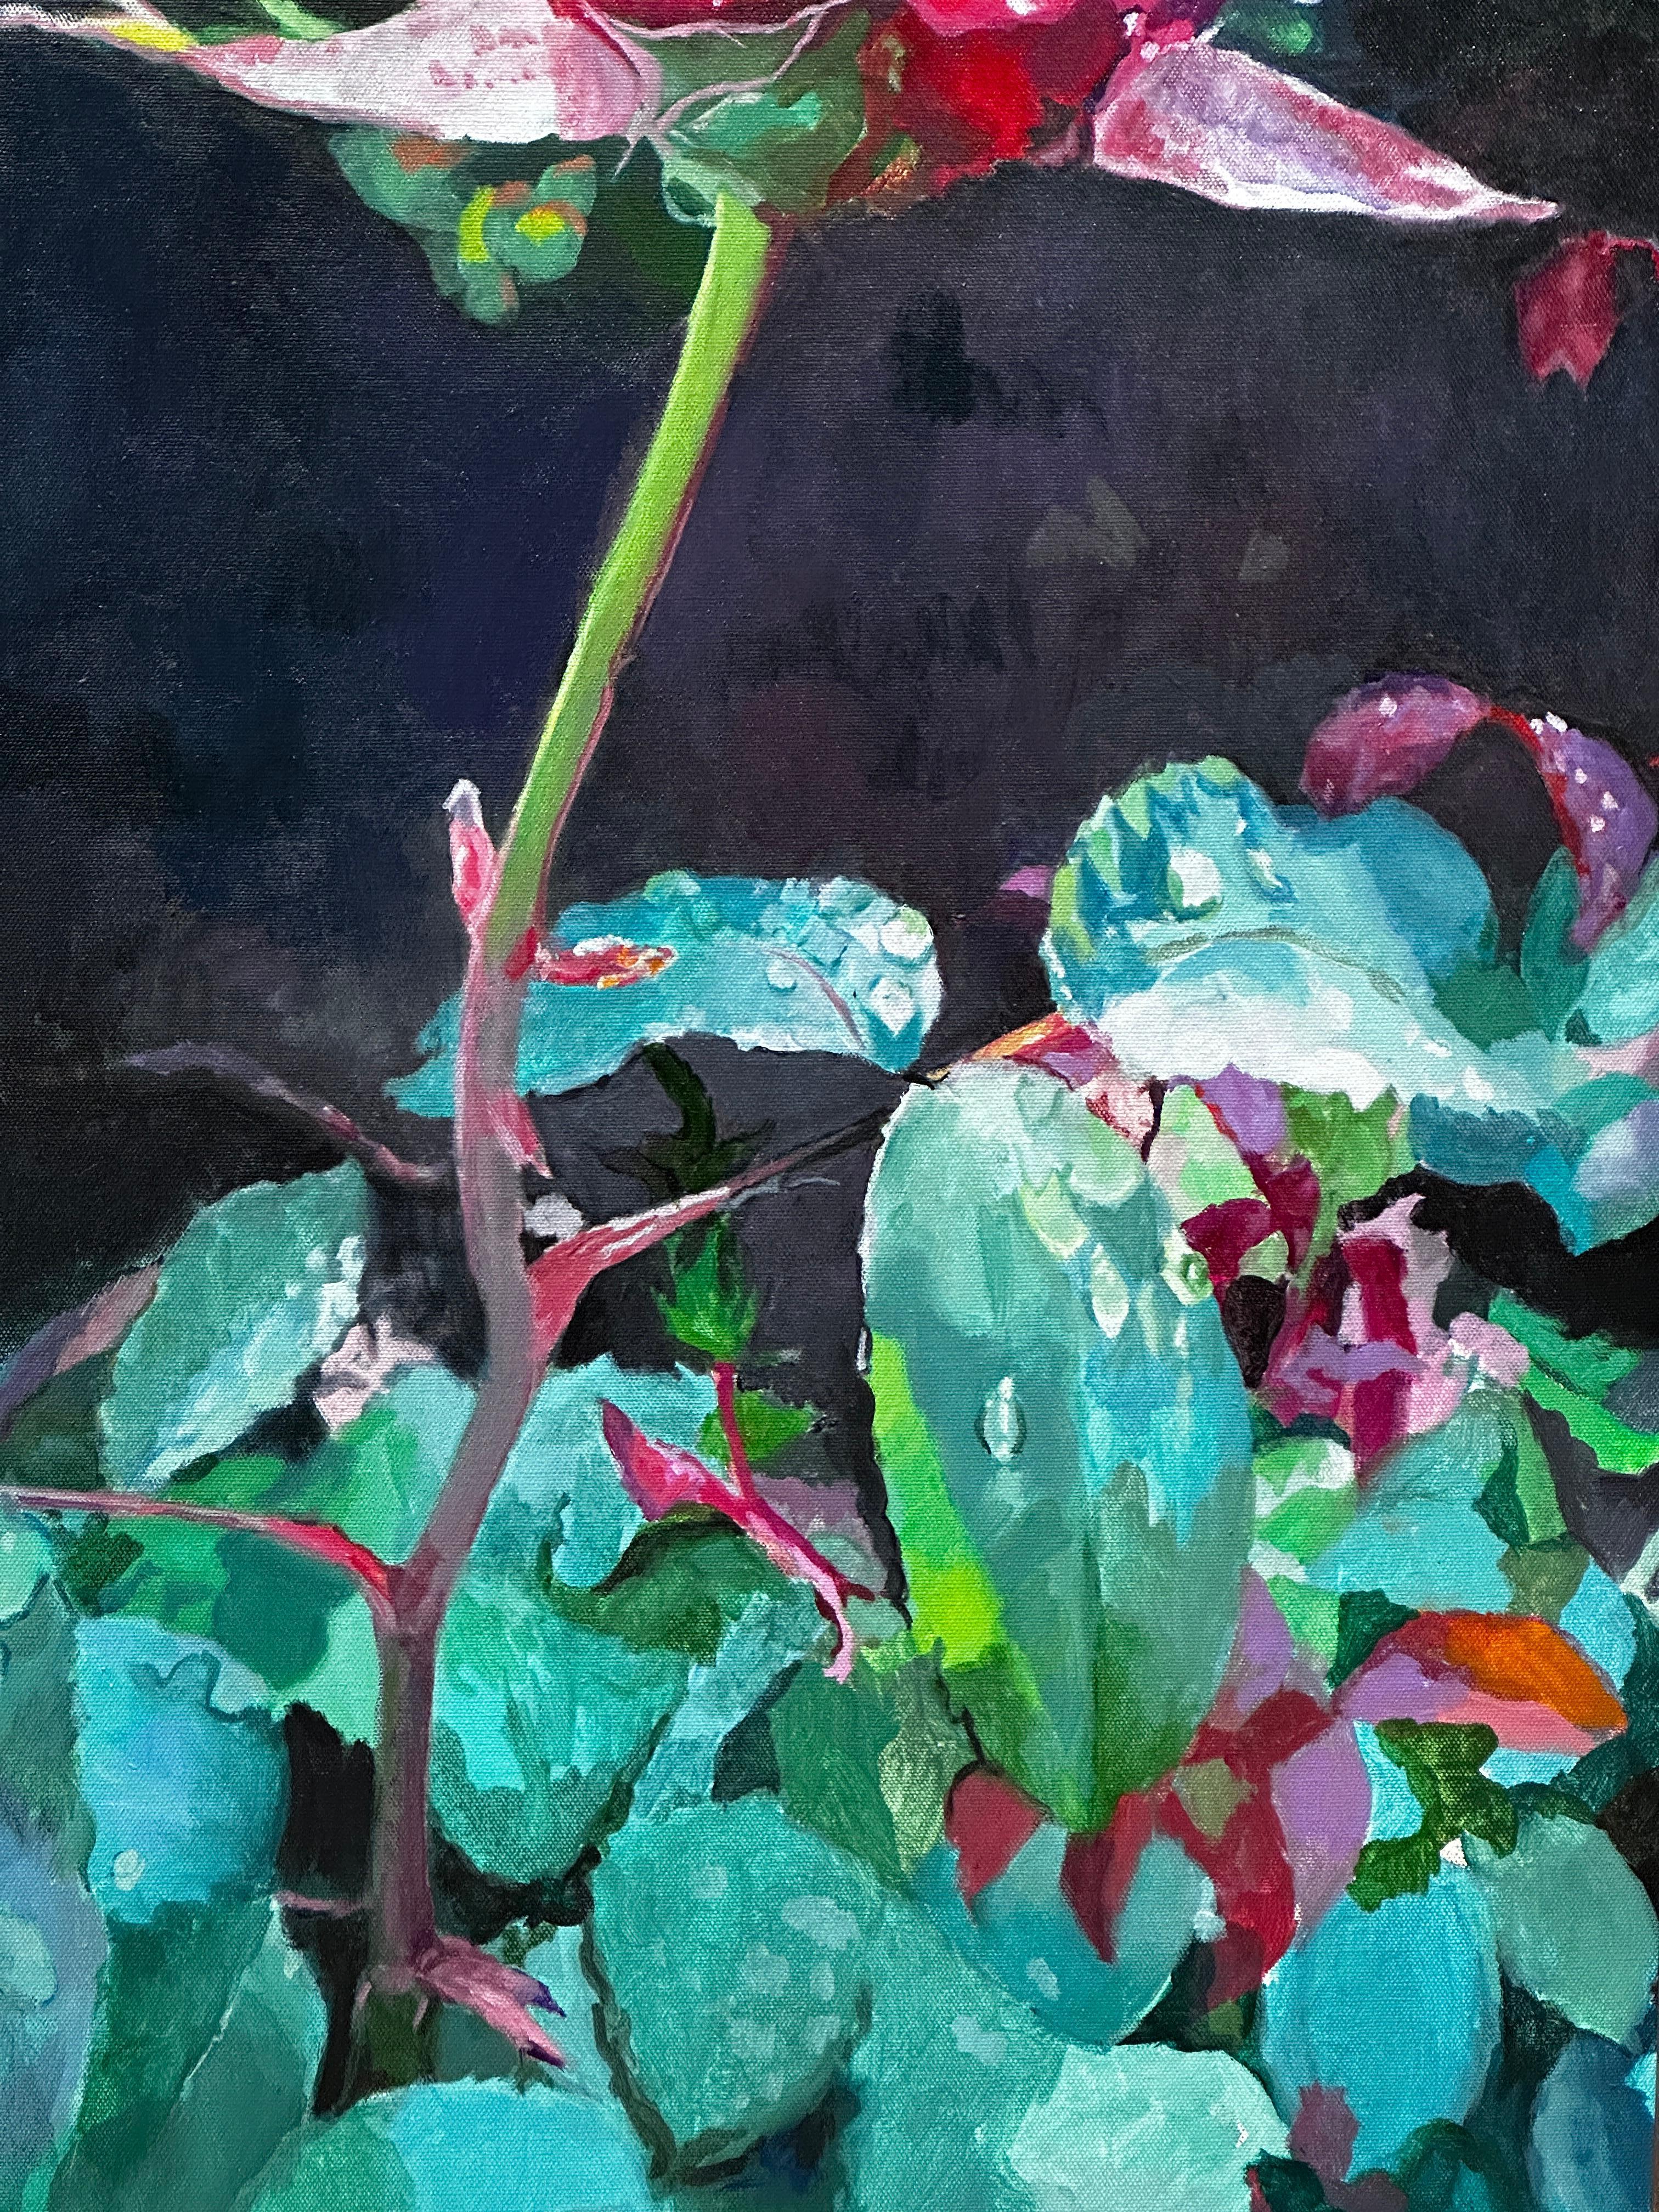 The oil painting on canvas by Pat Berger depicts a tall red rose rising above its leaves. 
Berger is renowned for her ability to connect viewers with the natural world. The bright red and green colors of the rose and the bush create a vivid contrast